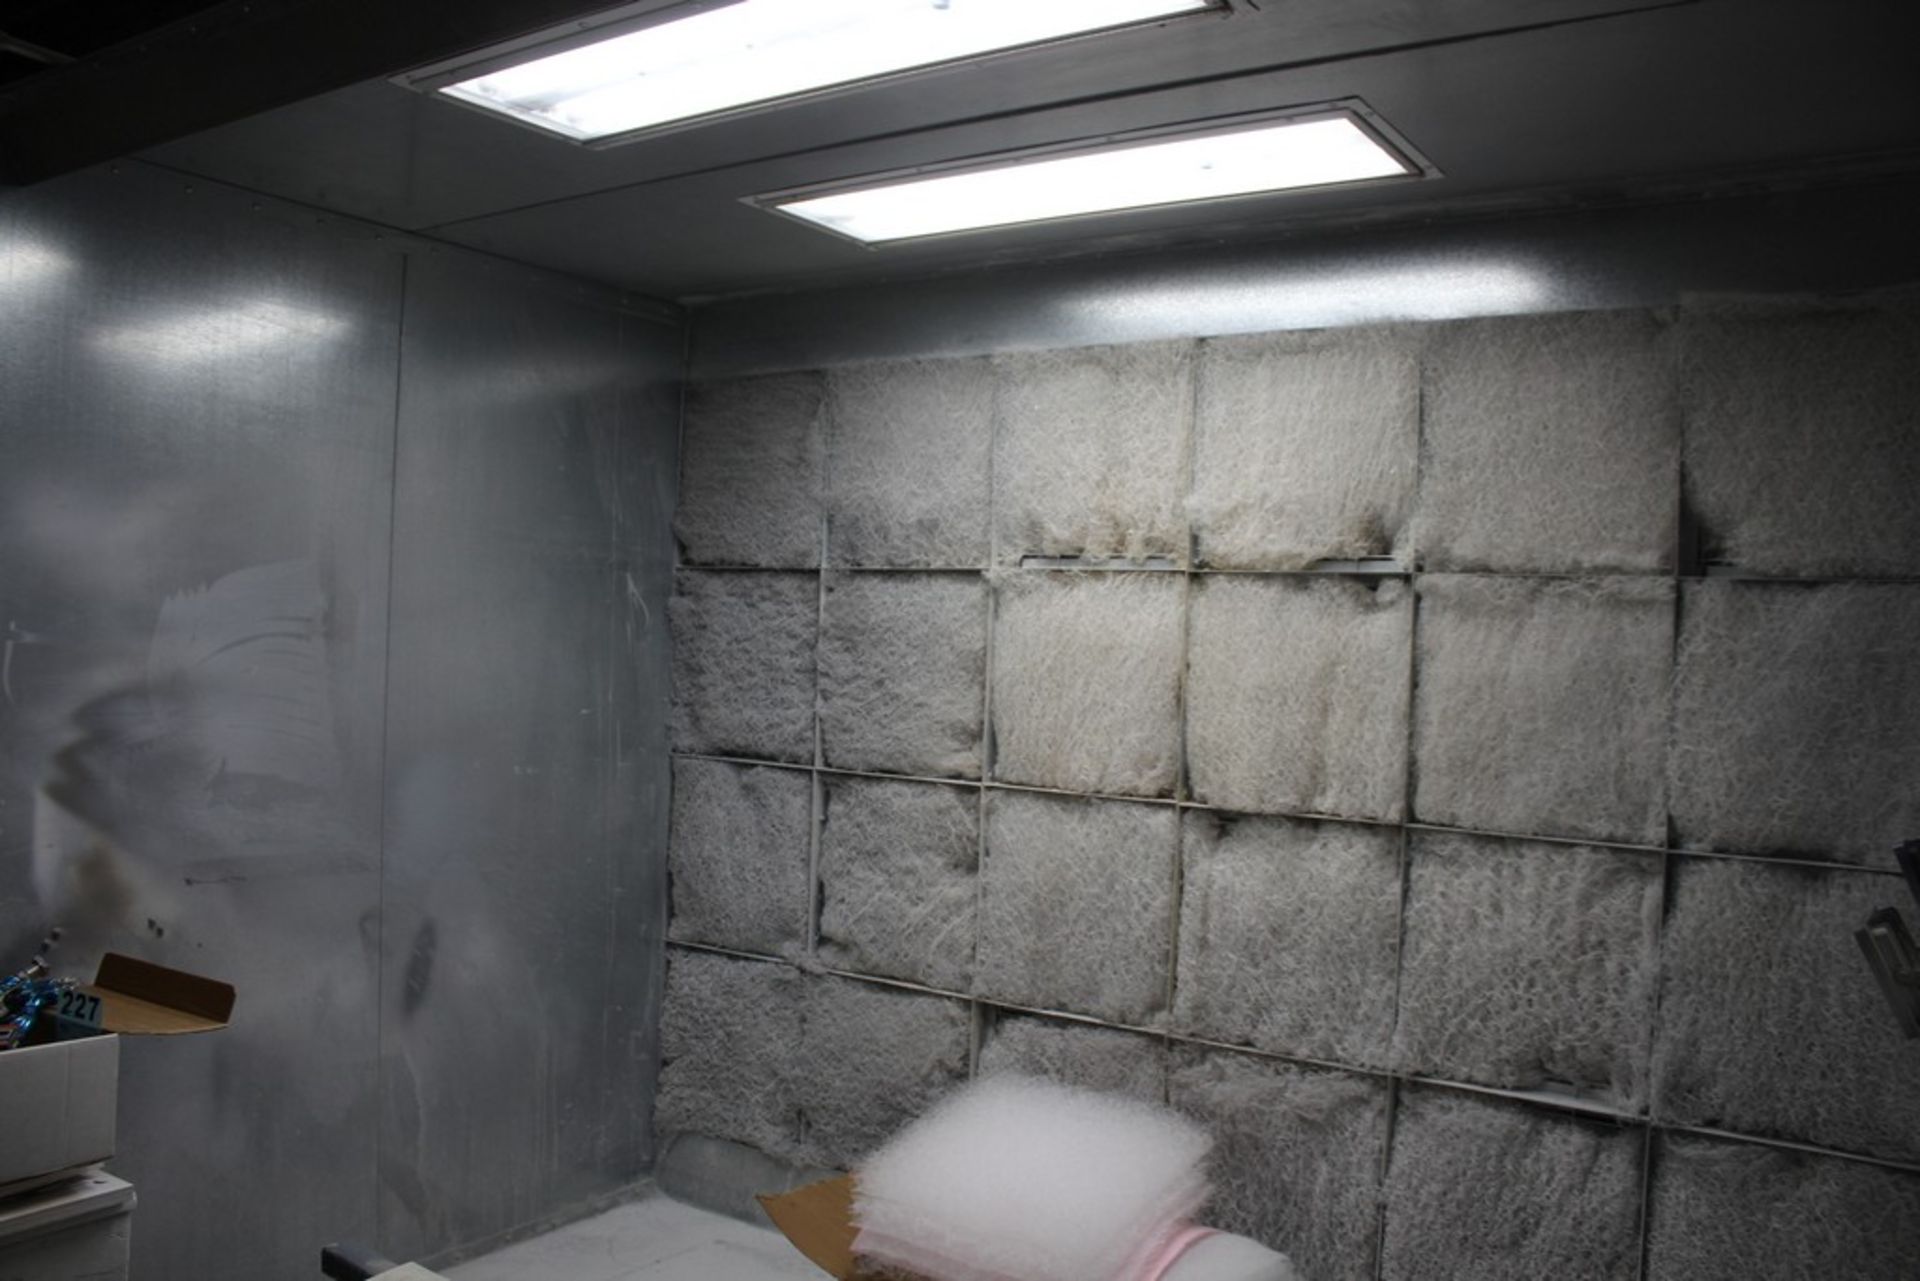 PAASCHE PAINT SPRAY BOOTH 10' W X 6' D X 8' H WITH CA TECHBOLOGIES SPRAY GUN SYSTEM AND EXTRA - Image 11 of 11